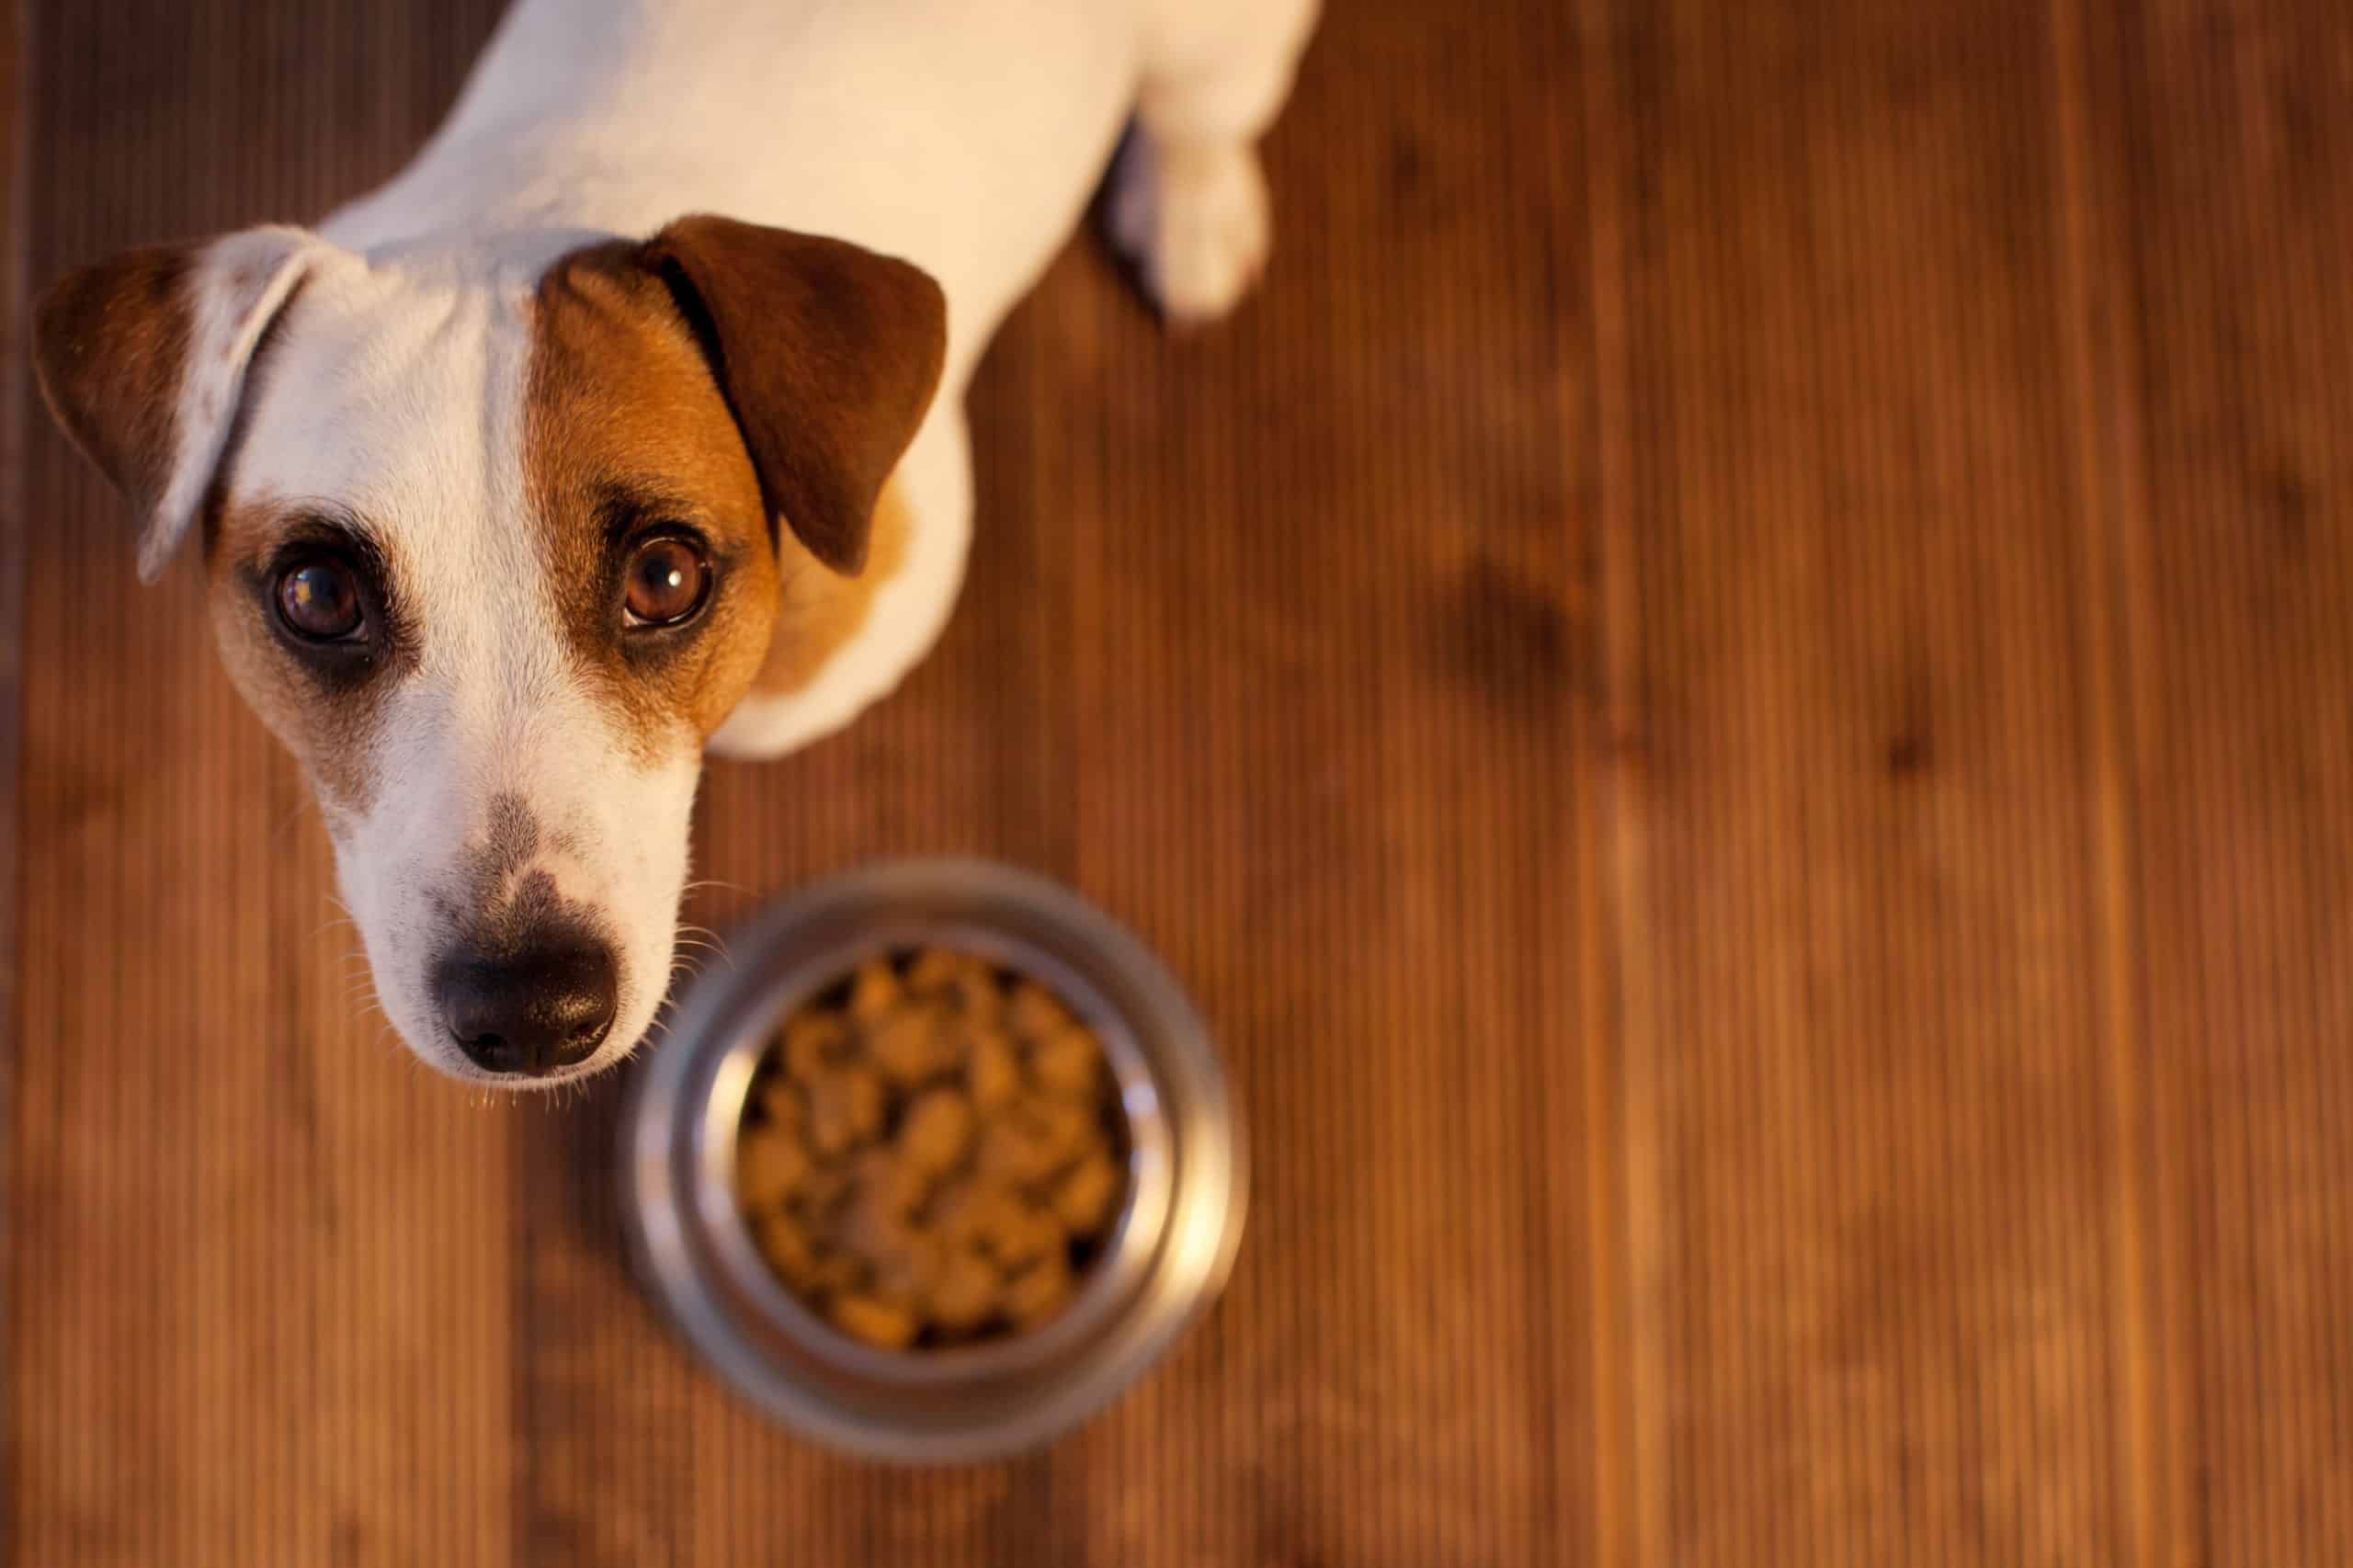 What to do if I forget to feed my dog once?